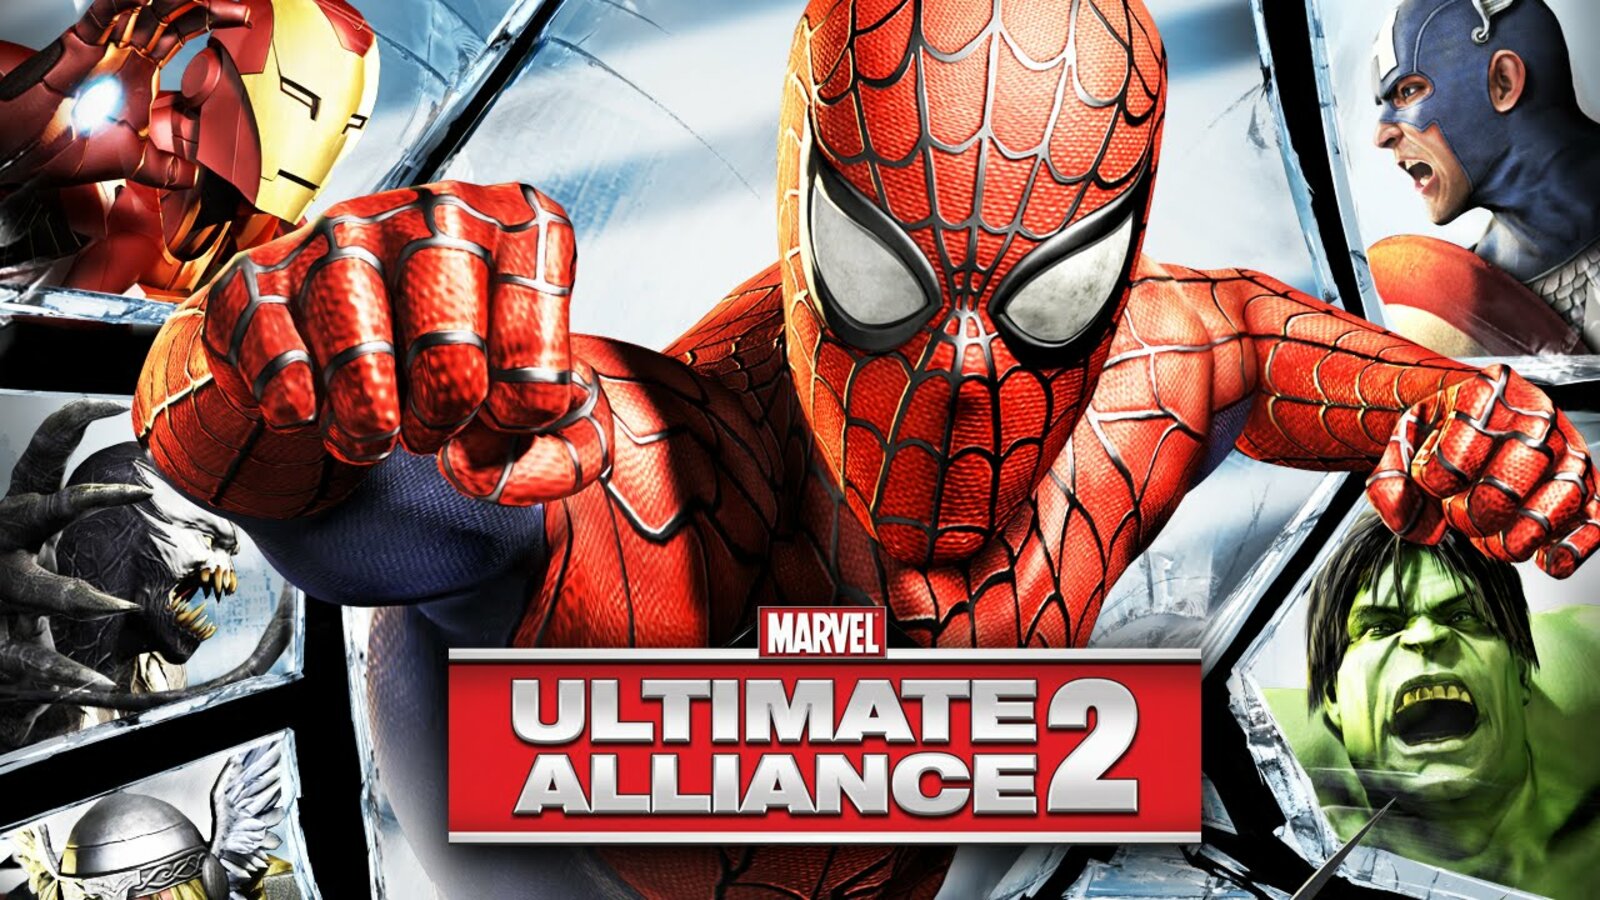 Marvel Ultimate Alliance 1 & 2 have to be the worst PC ports of 2016